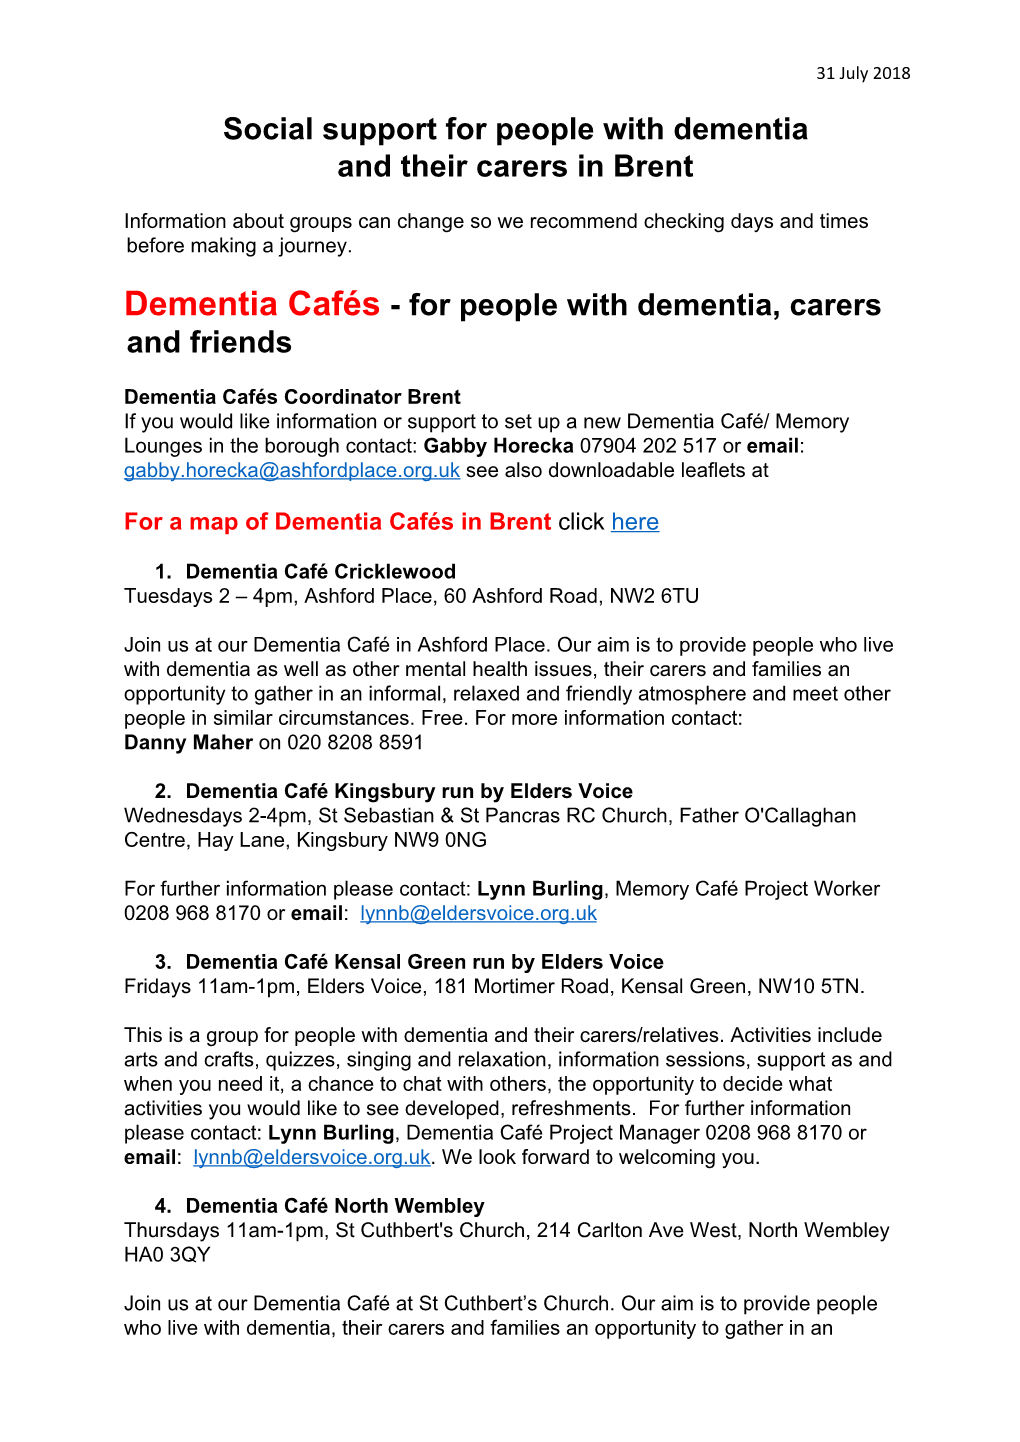 Social Support for People with Dementia and Their Carers in Brent